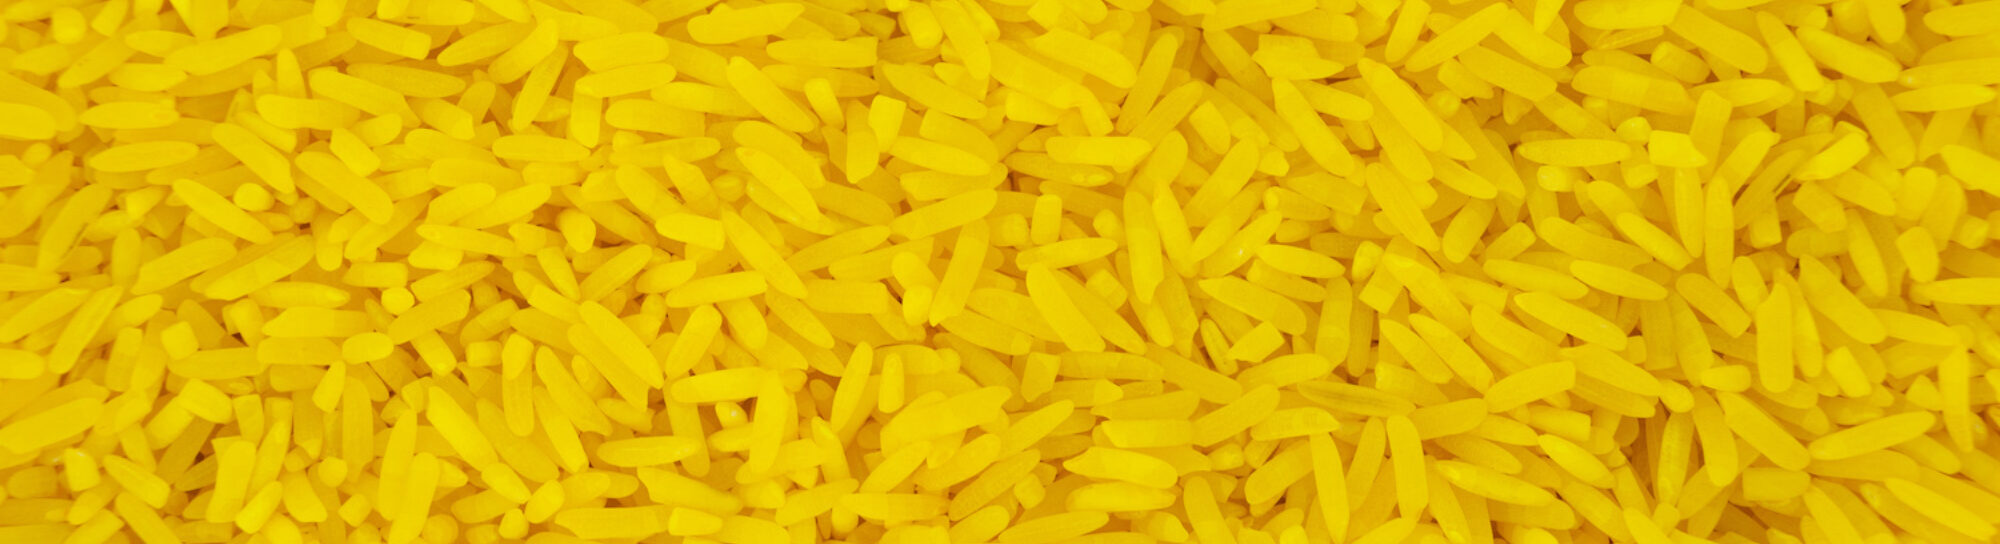 Finally, a golden age for golden rice